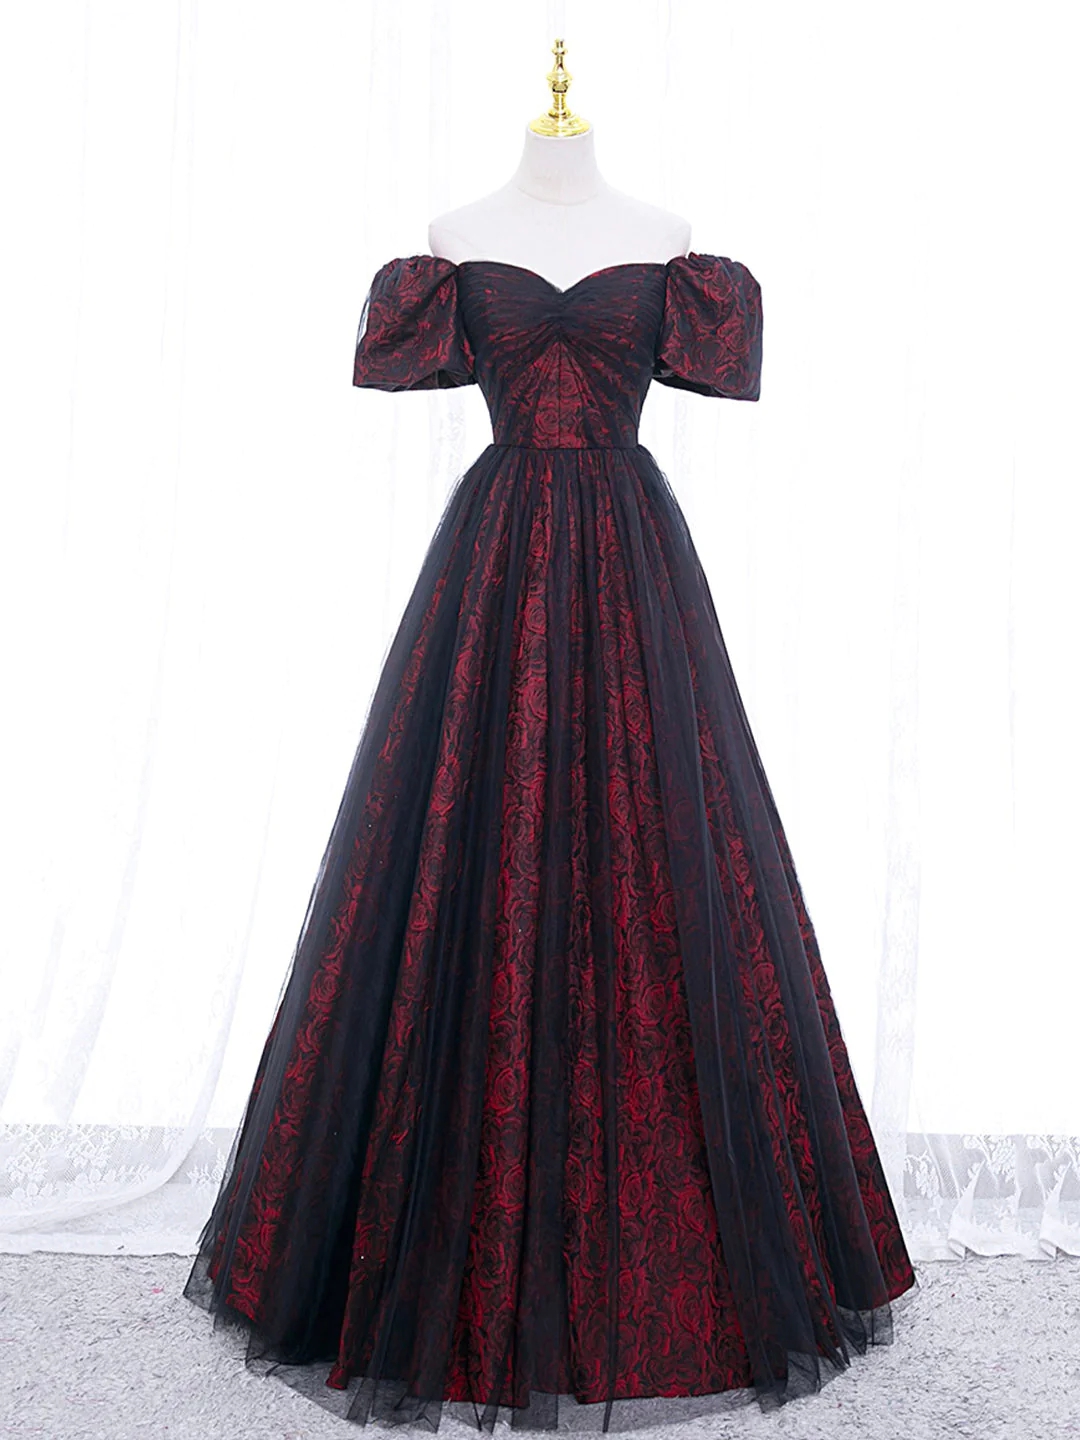 Simple A-line Tulle Lace Black/burgundy Prom Dresses